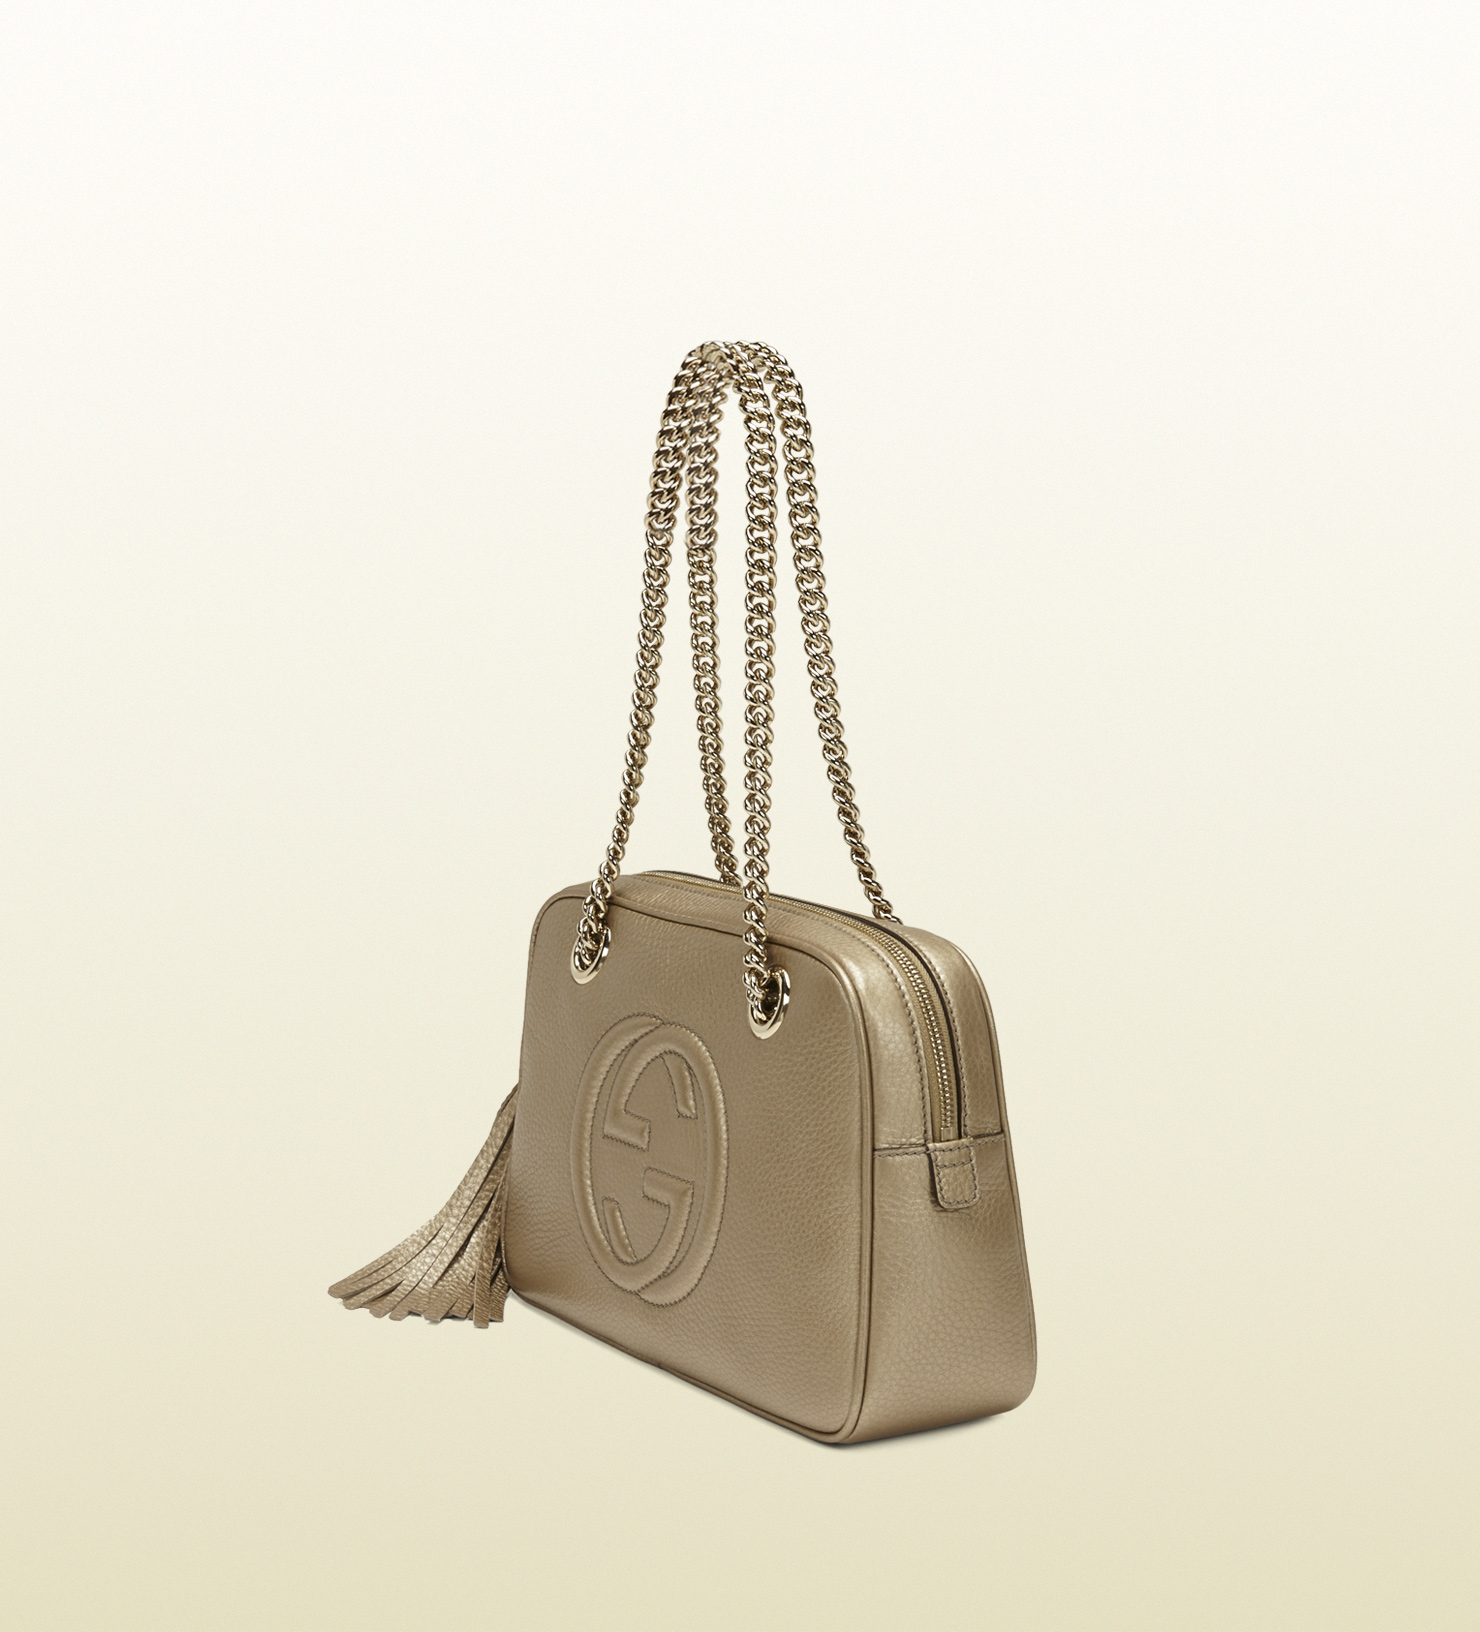 Gucci Soho Metallic Leather Chain Shoulder Bag in Beige (Natural) - Lyst